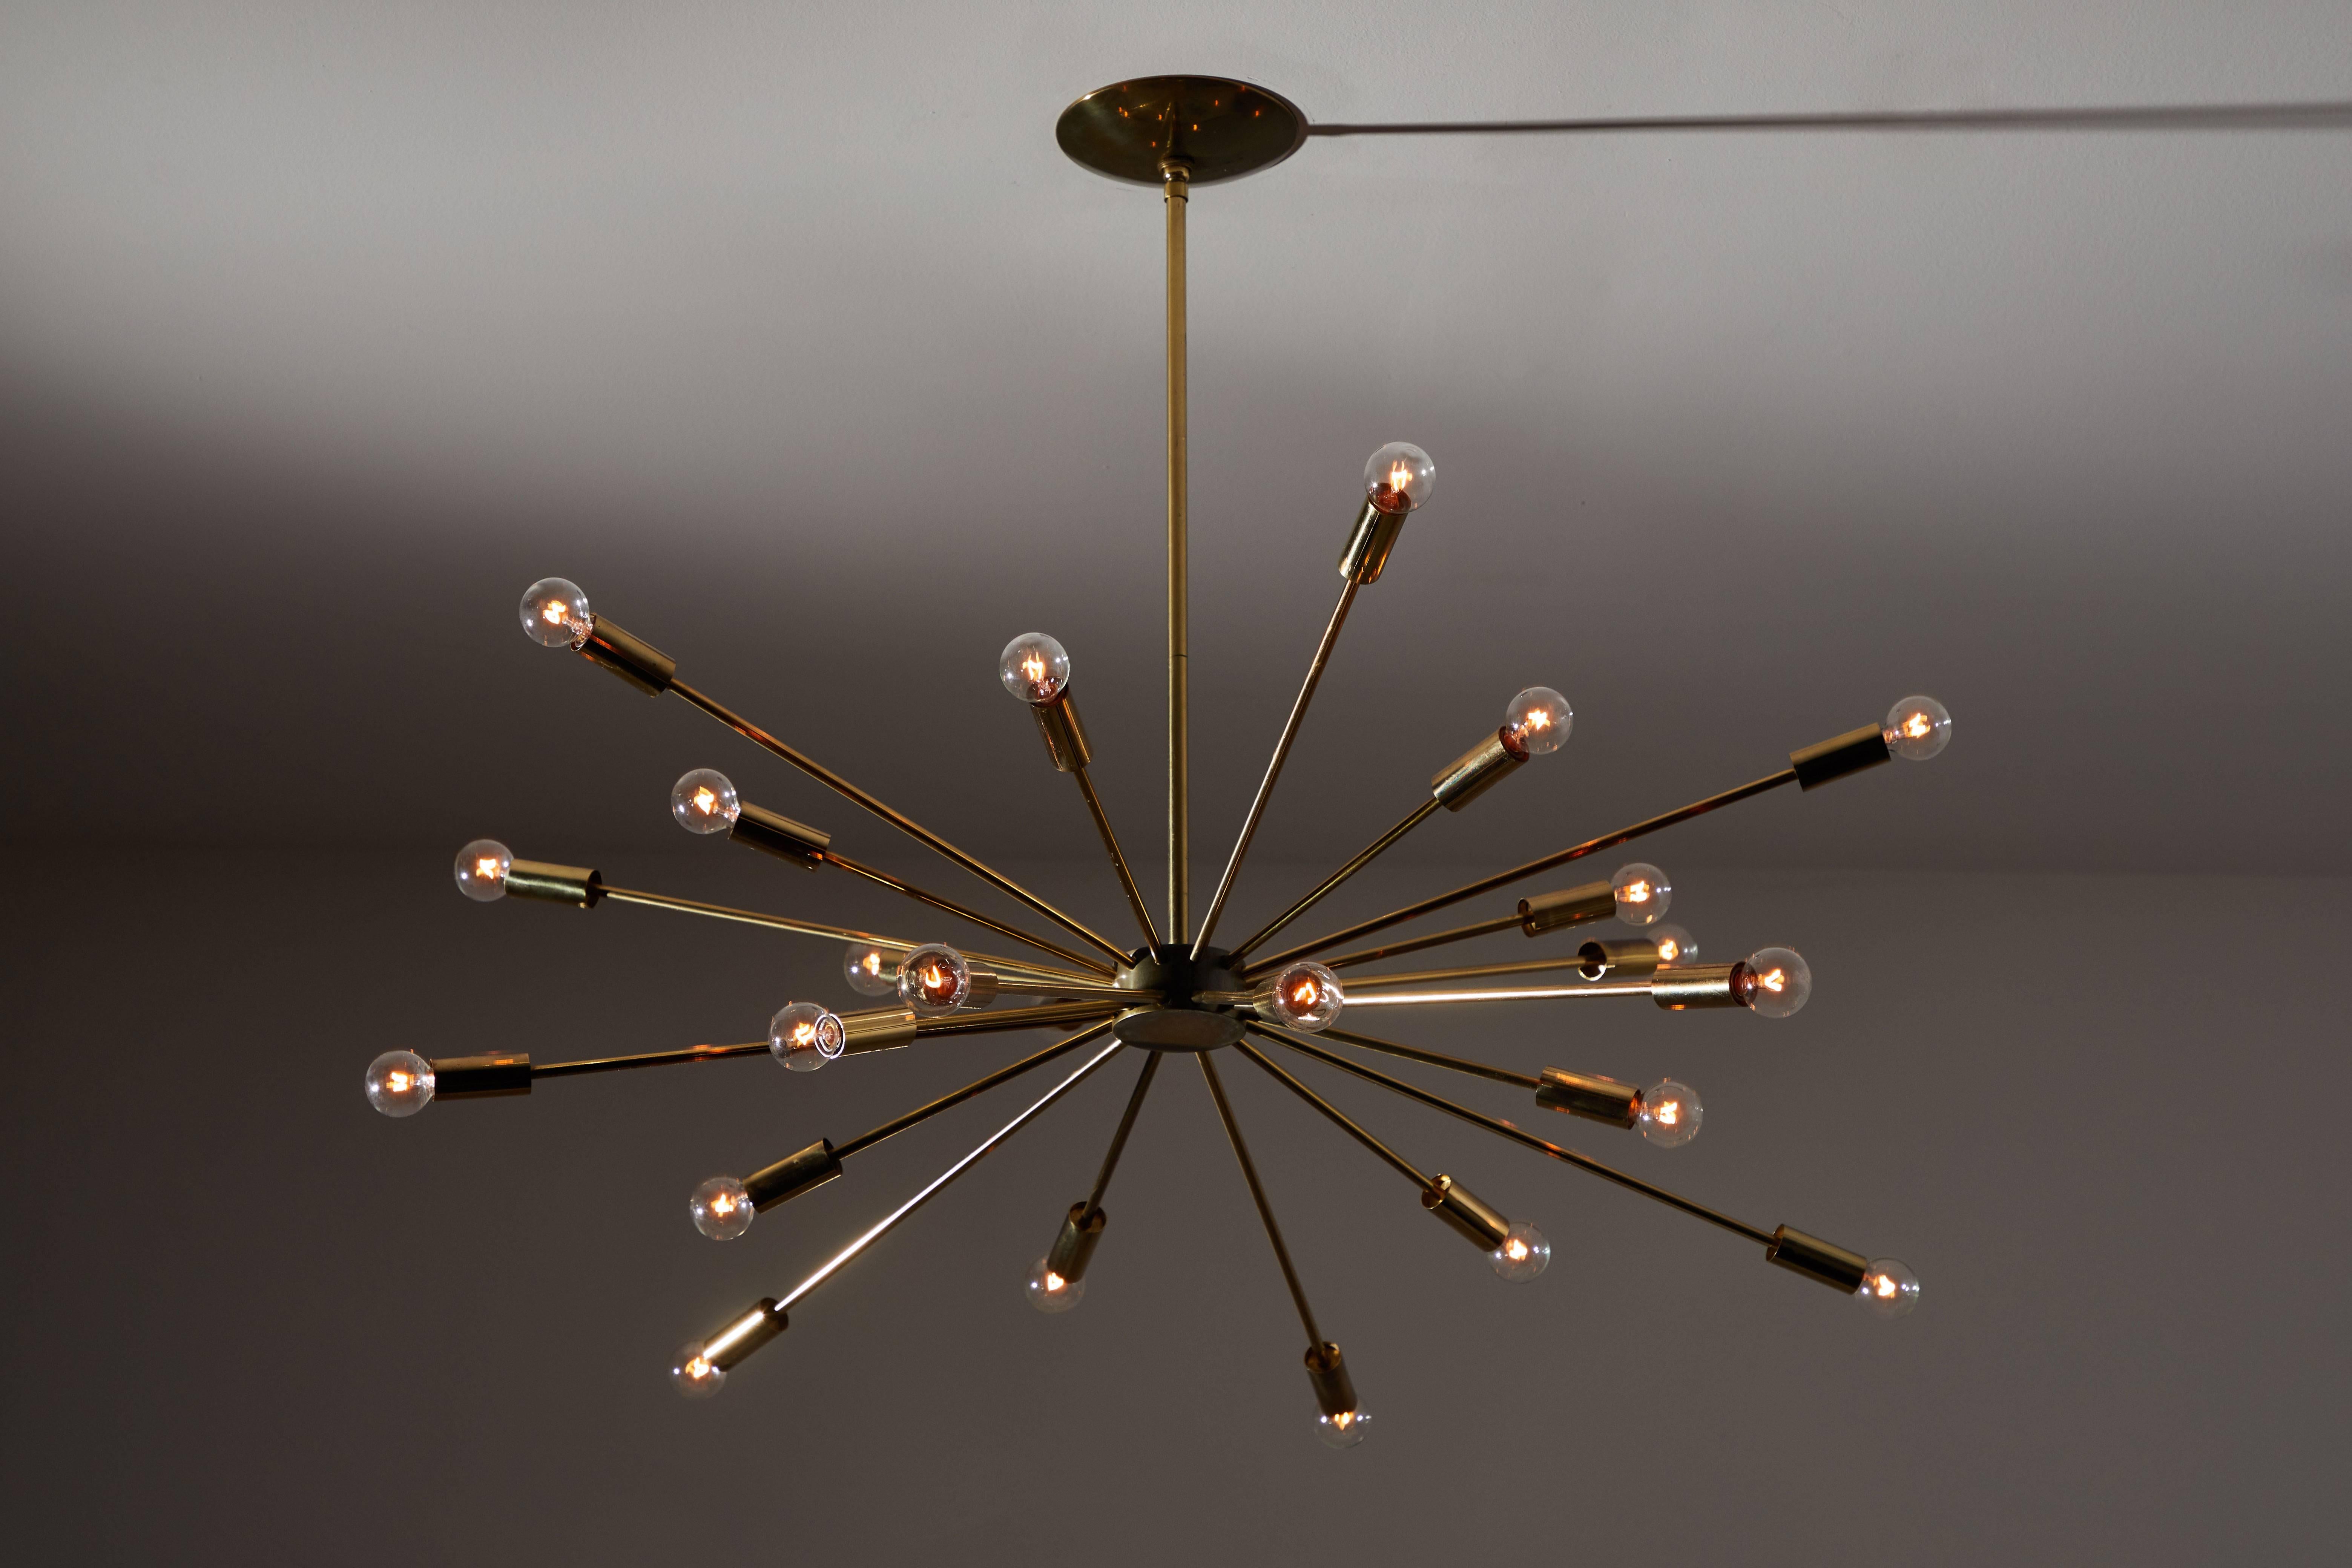 Twenty-Four-Arm Chandelier by Gino Sarfatti for Lightolier. Designed and manufactured in Italy, circa 1950s. Brass arms and hardware. Wired for US junction boxes. Takes 24 E14 European candelabra bulbs.